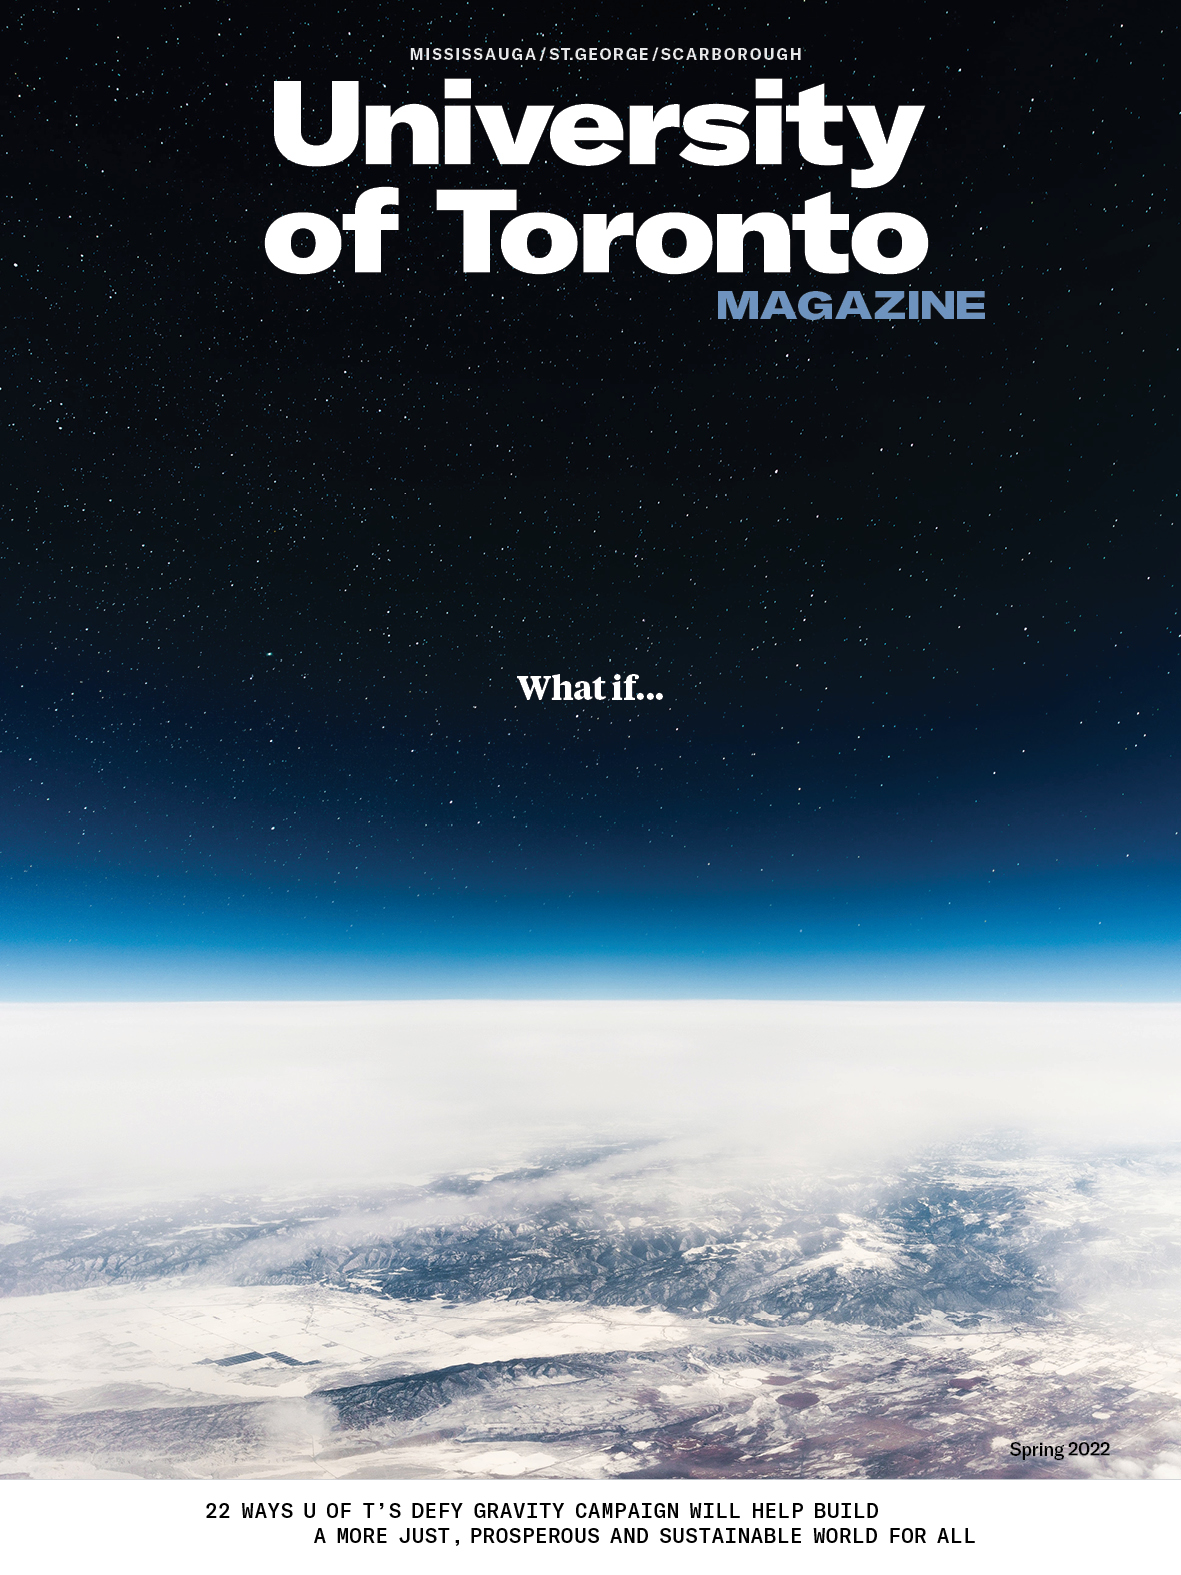 Cover photo for the Spring 2022 issue, showing the surface of the Earth and the words 